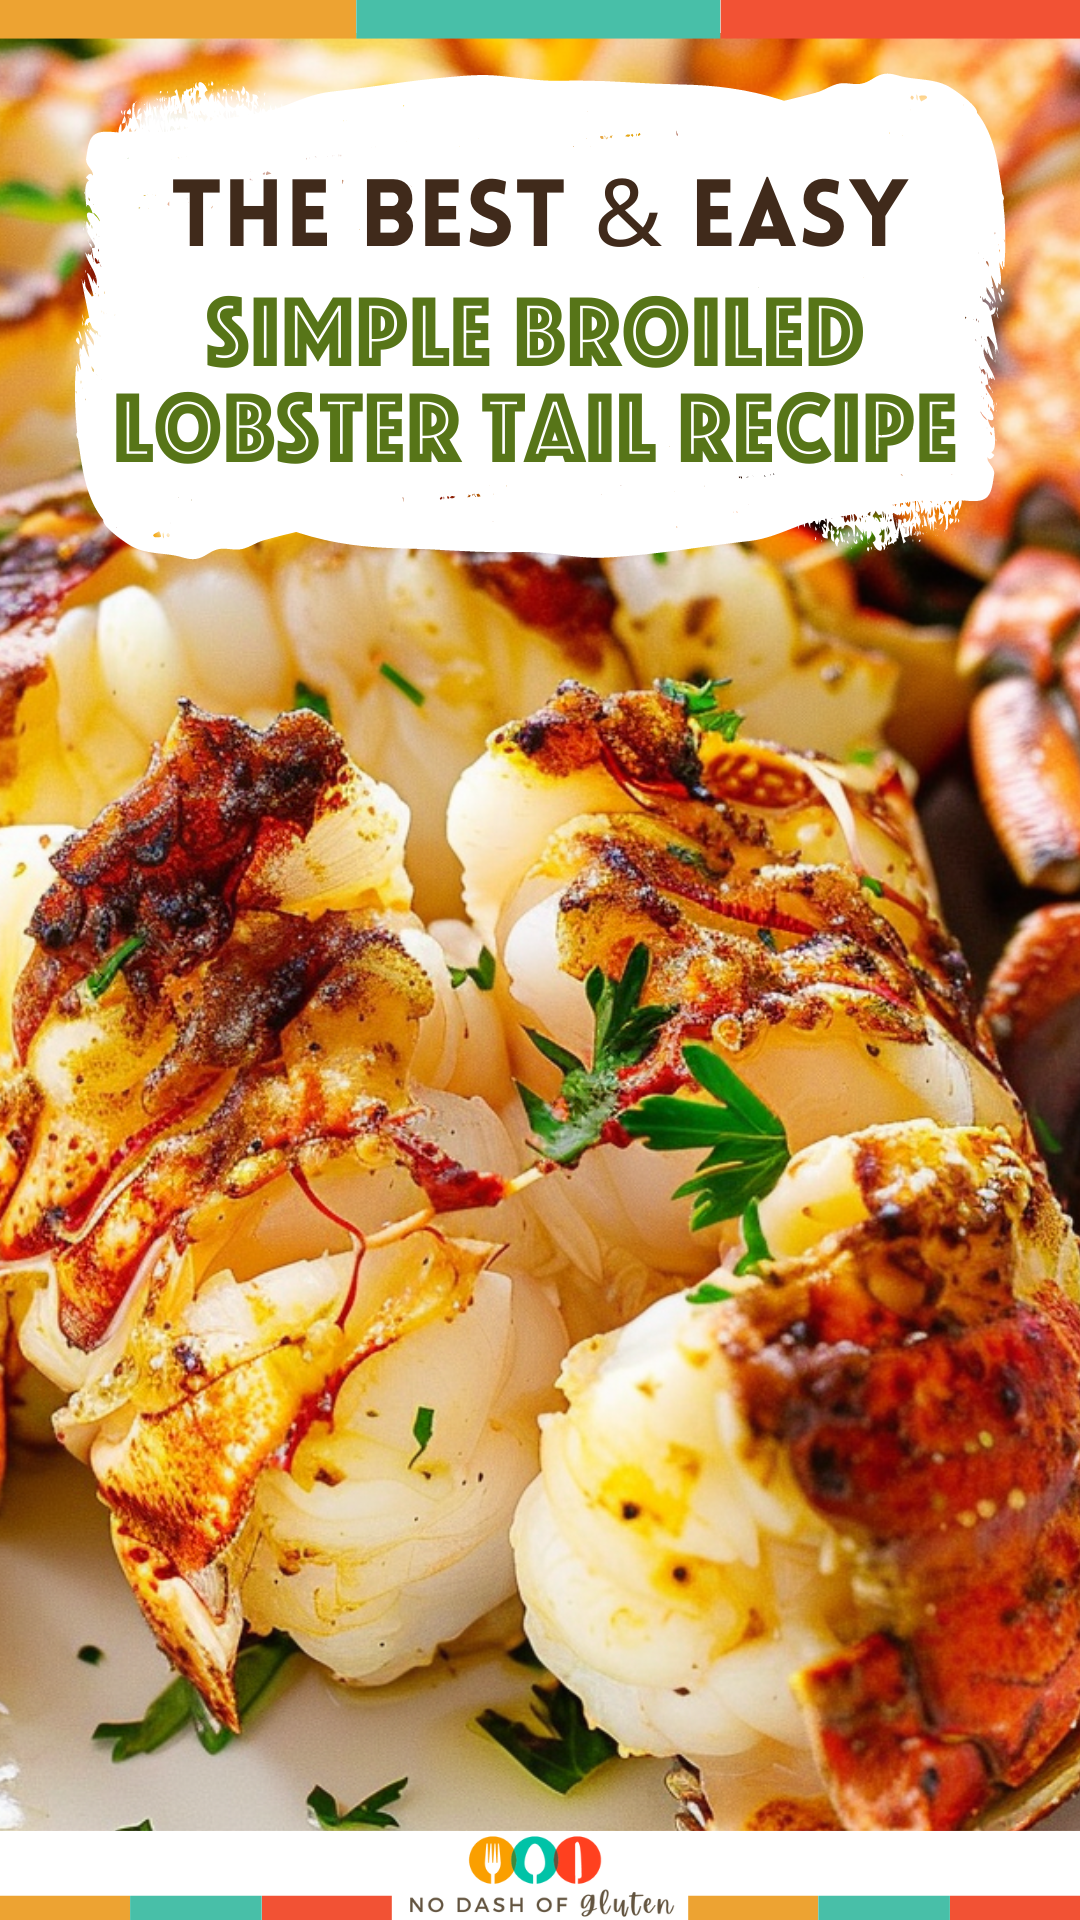 Simple Broiled Lobster Tail Recipe